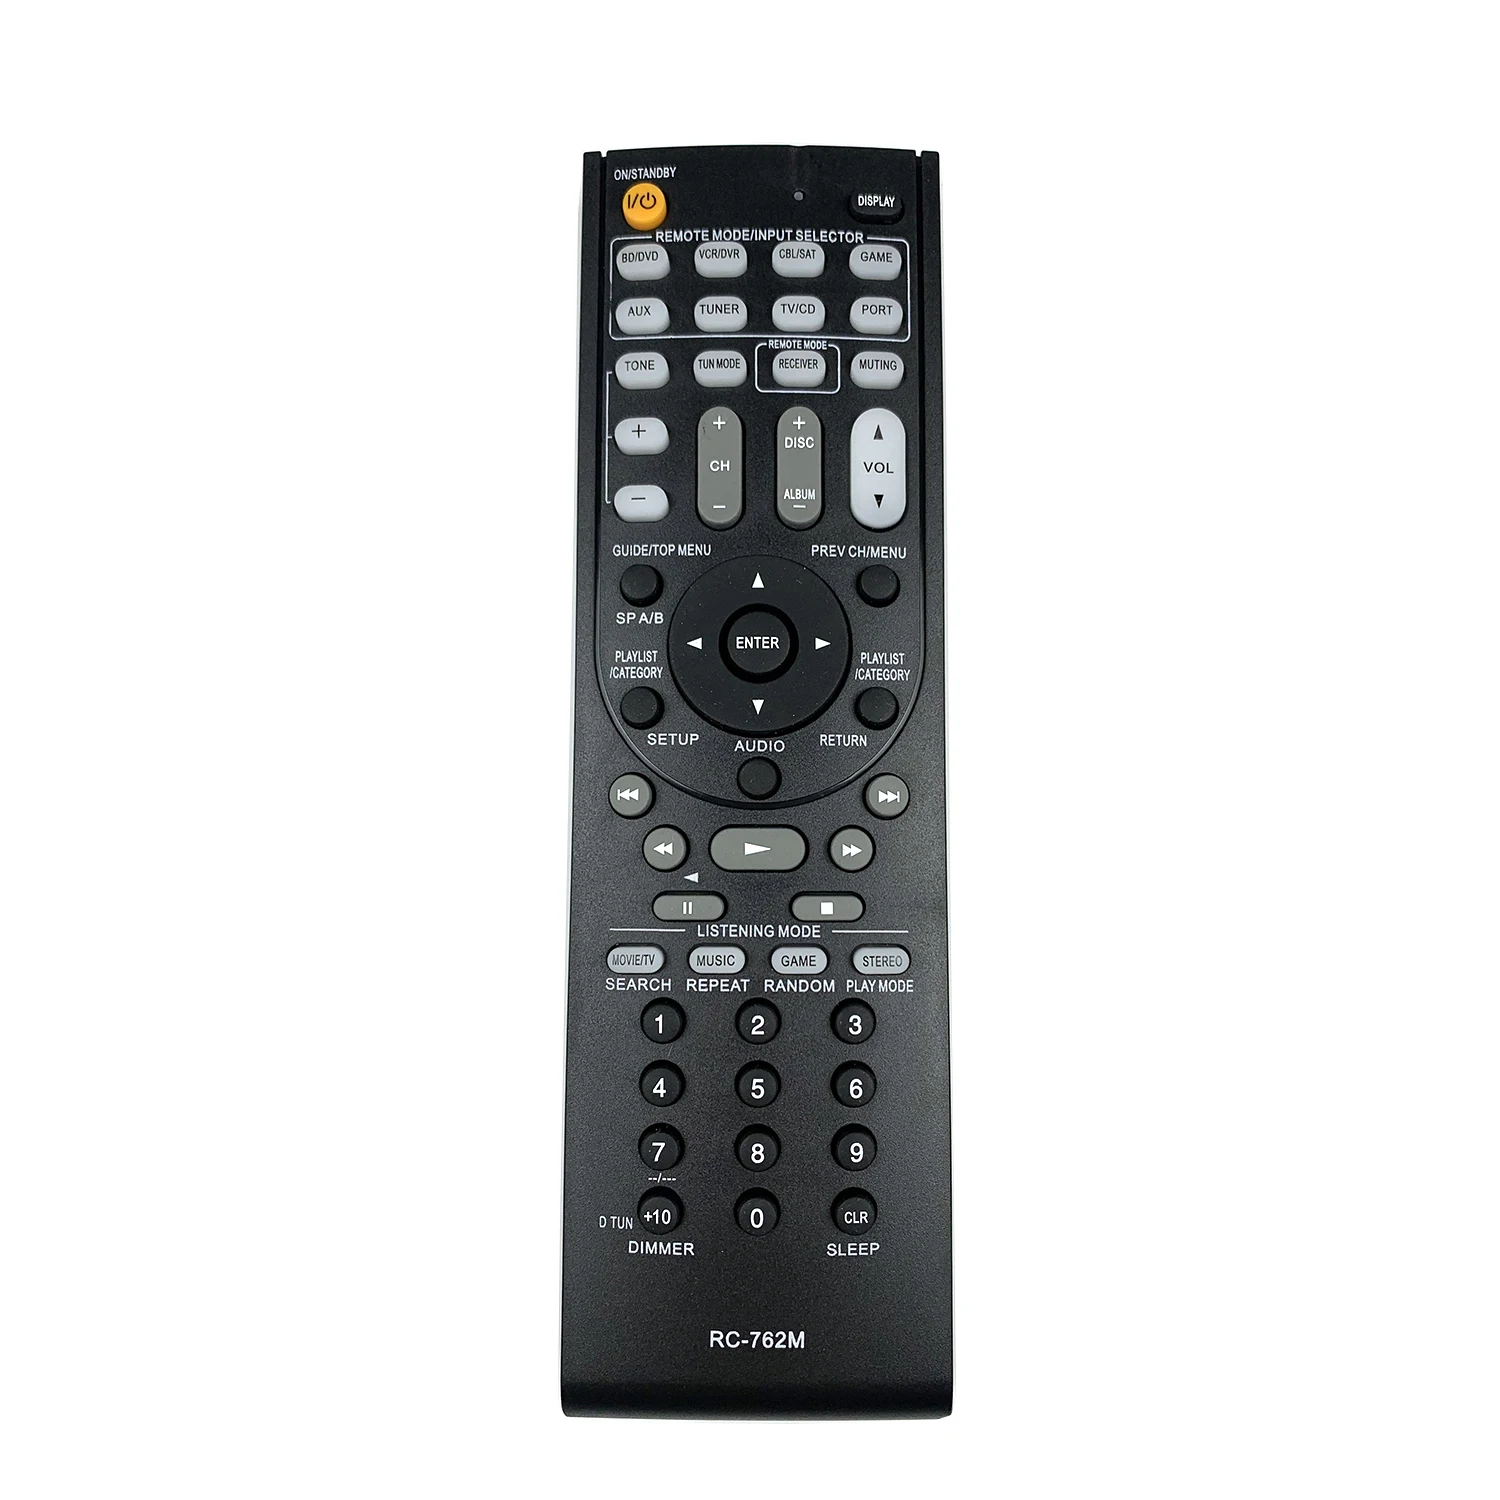 

RC-762M Replaced Remote Control for ONKYO AV Receiver HT-S3300 HT-S3400 TX-SR308 HT-R280 HTP-380 SKF-380L SKF-380R SKR-380L